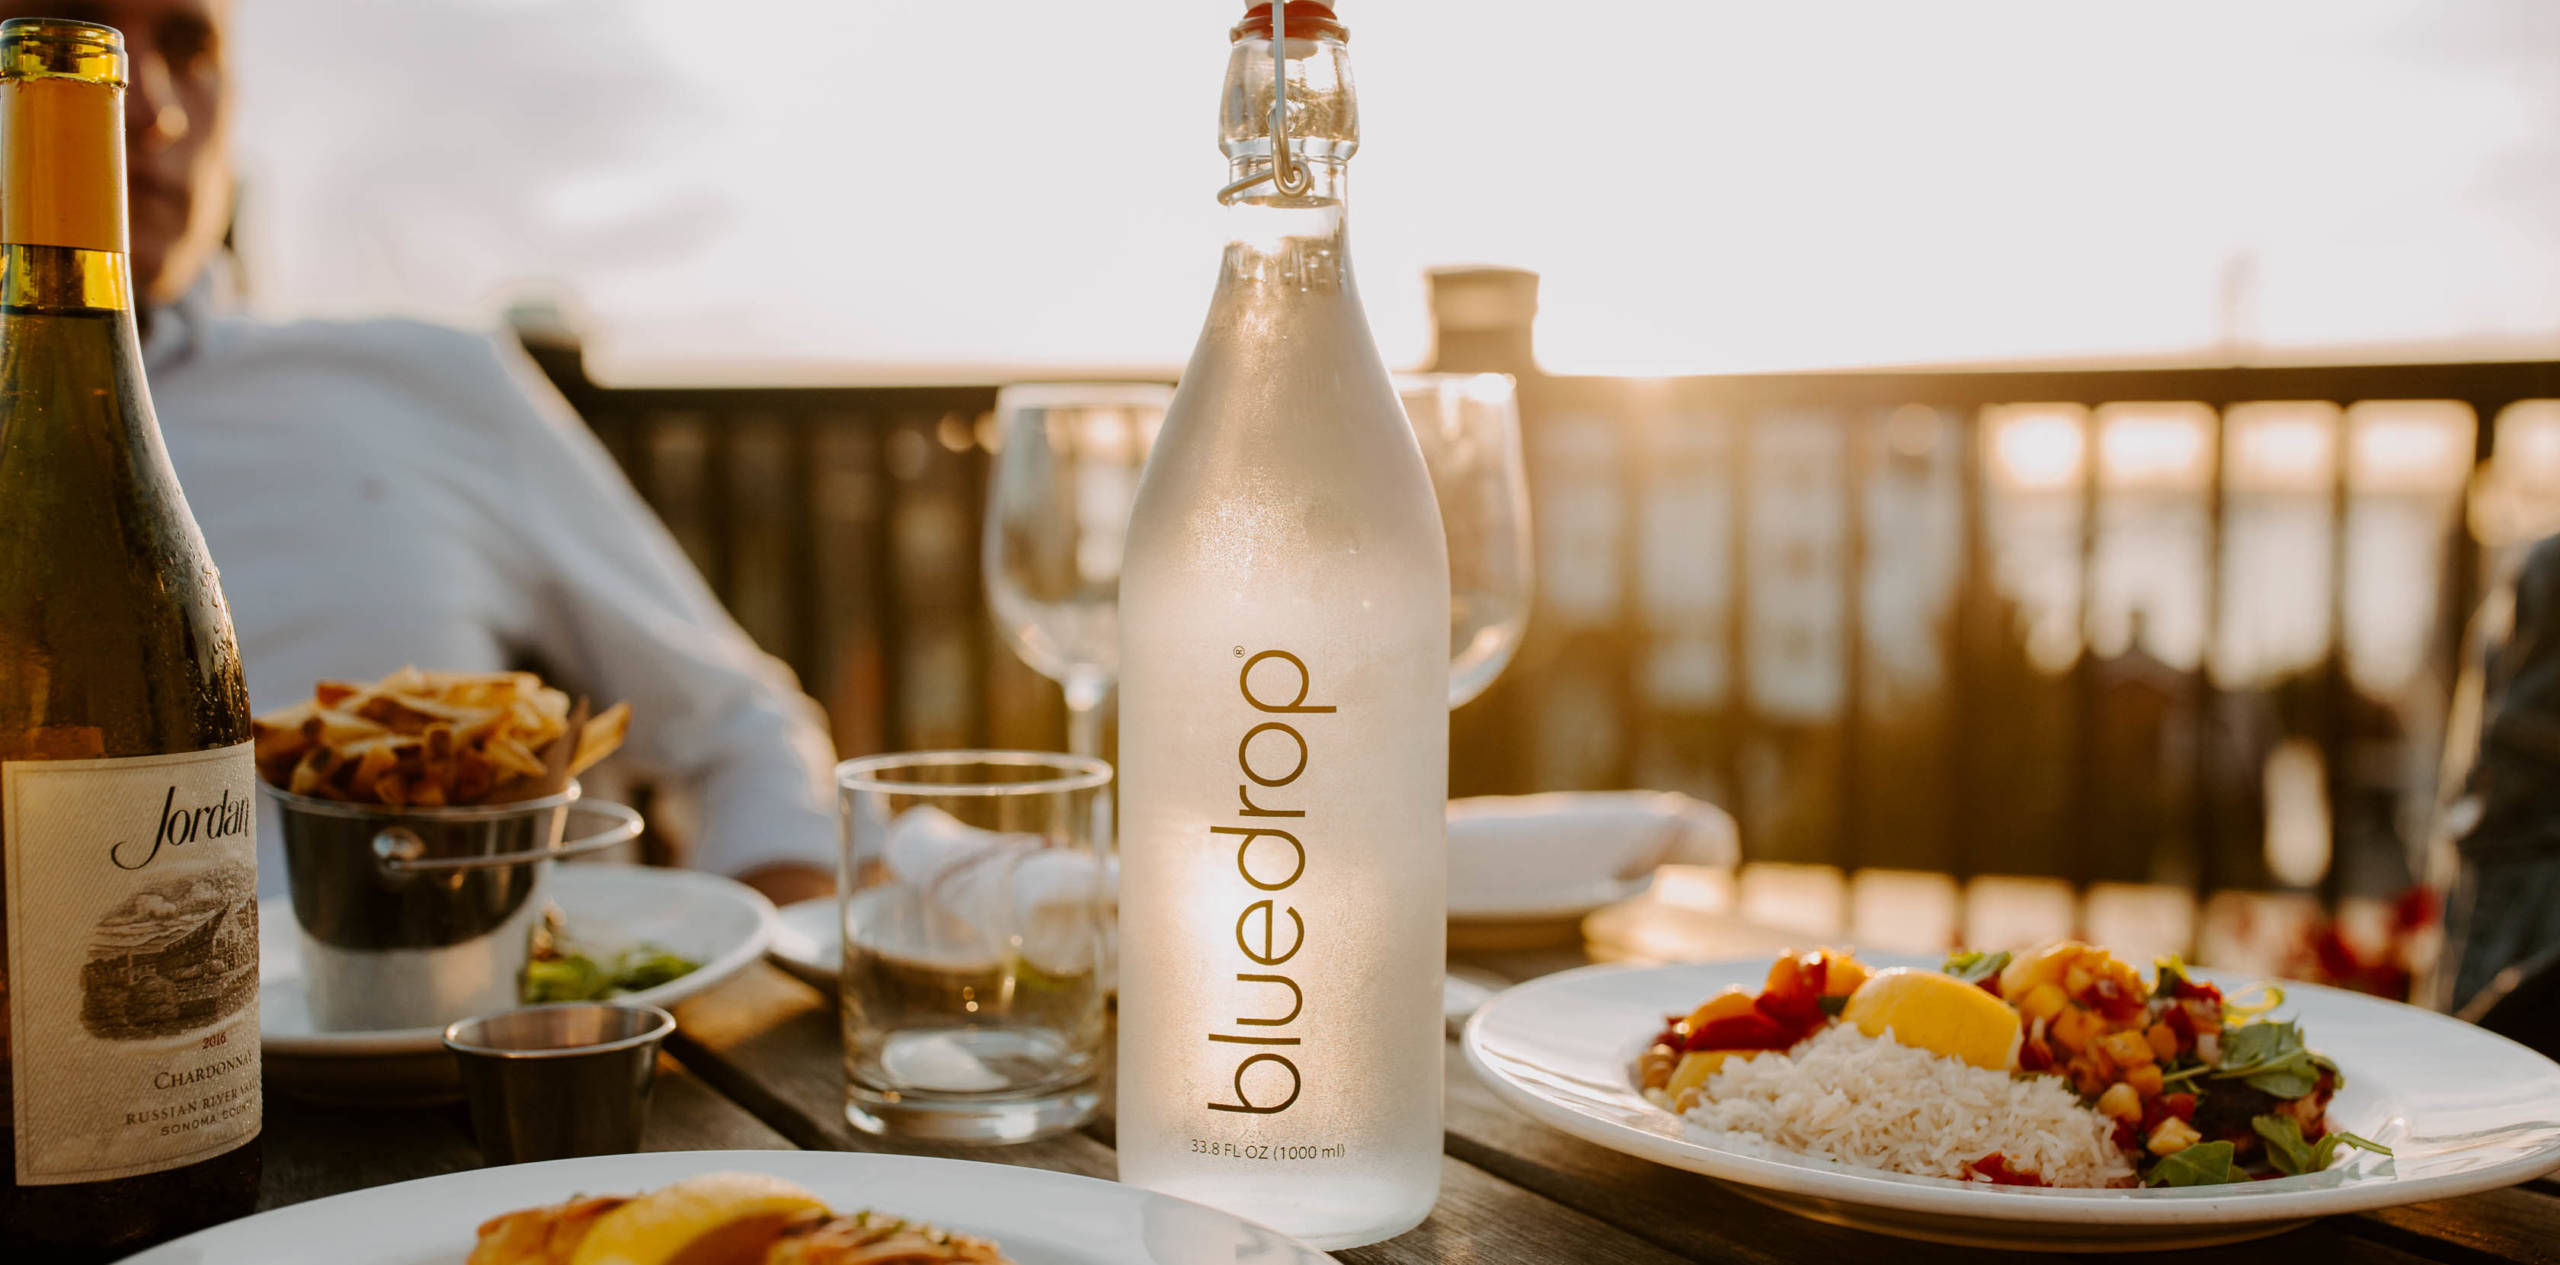 A bottle of bluedrop water sitting on a restaurant table with plates of food surrounding it.